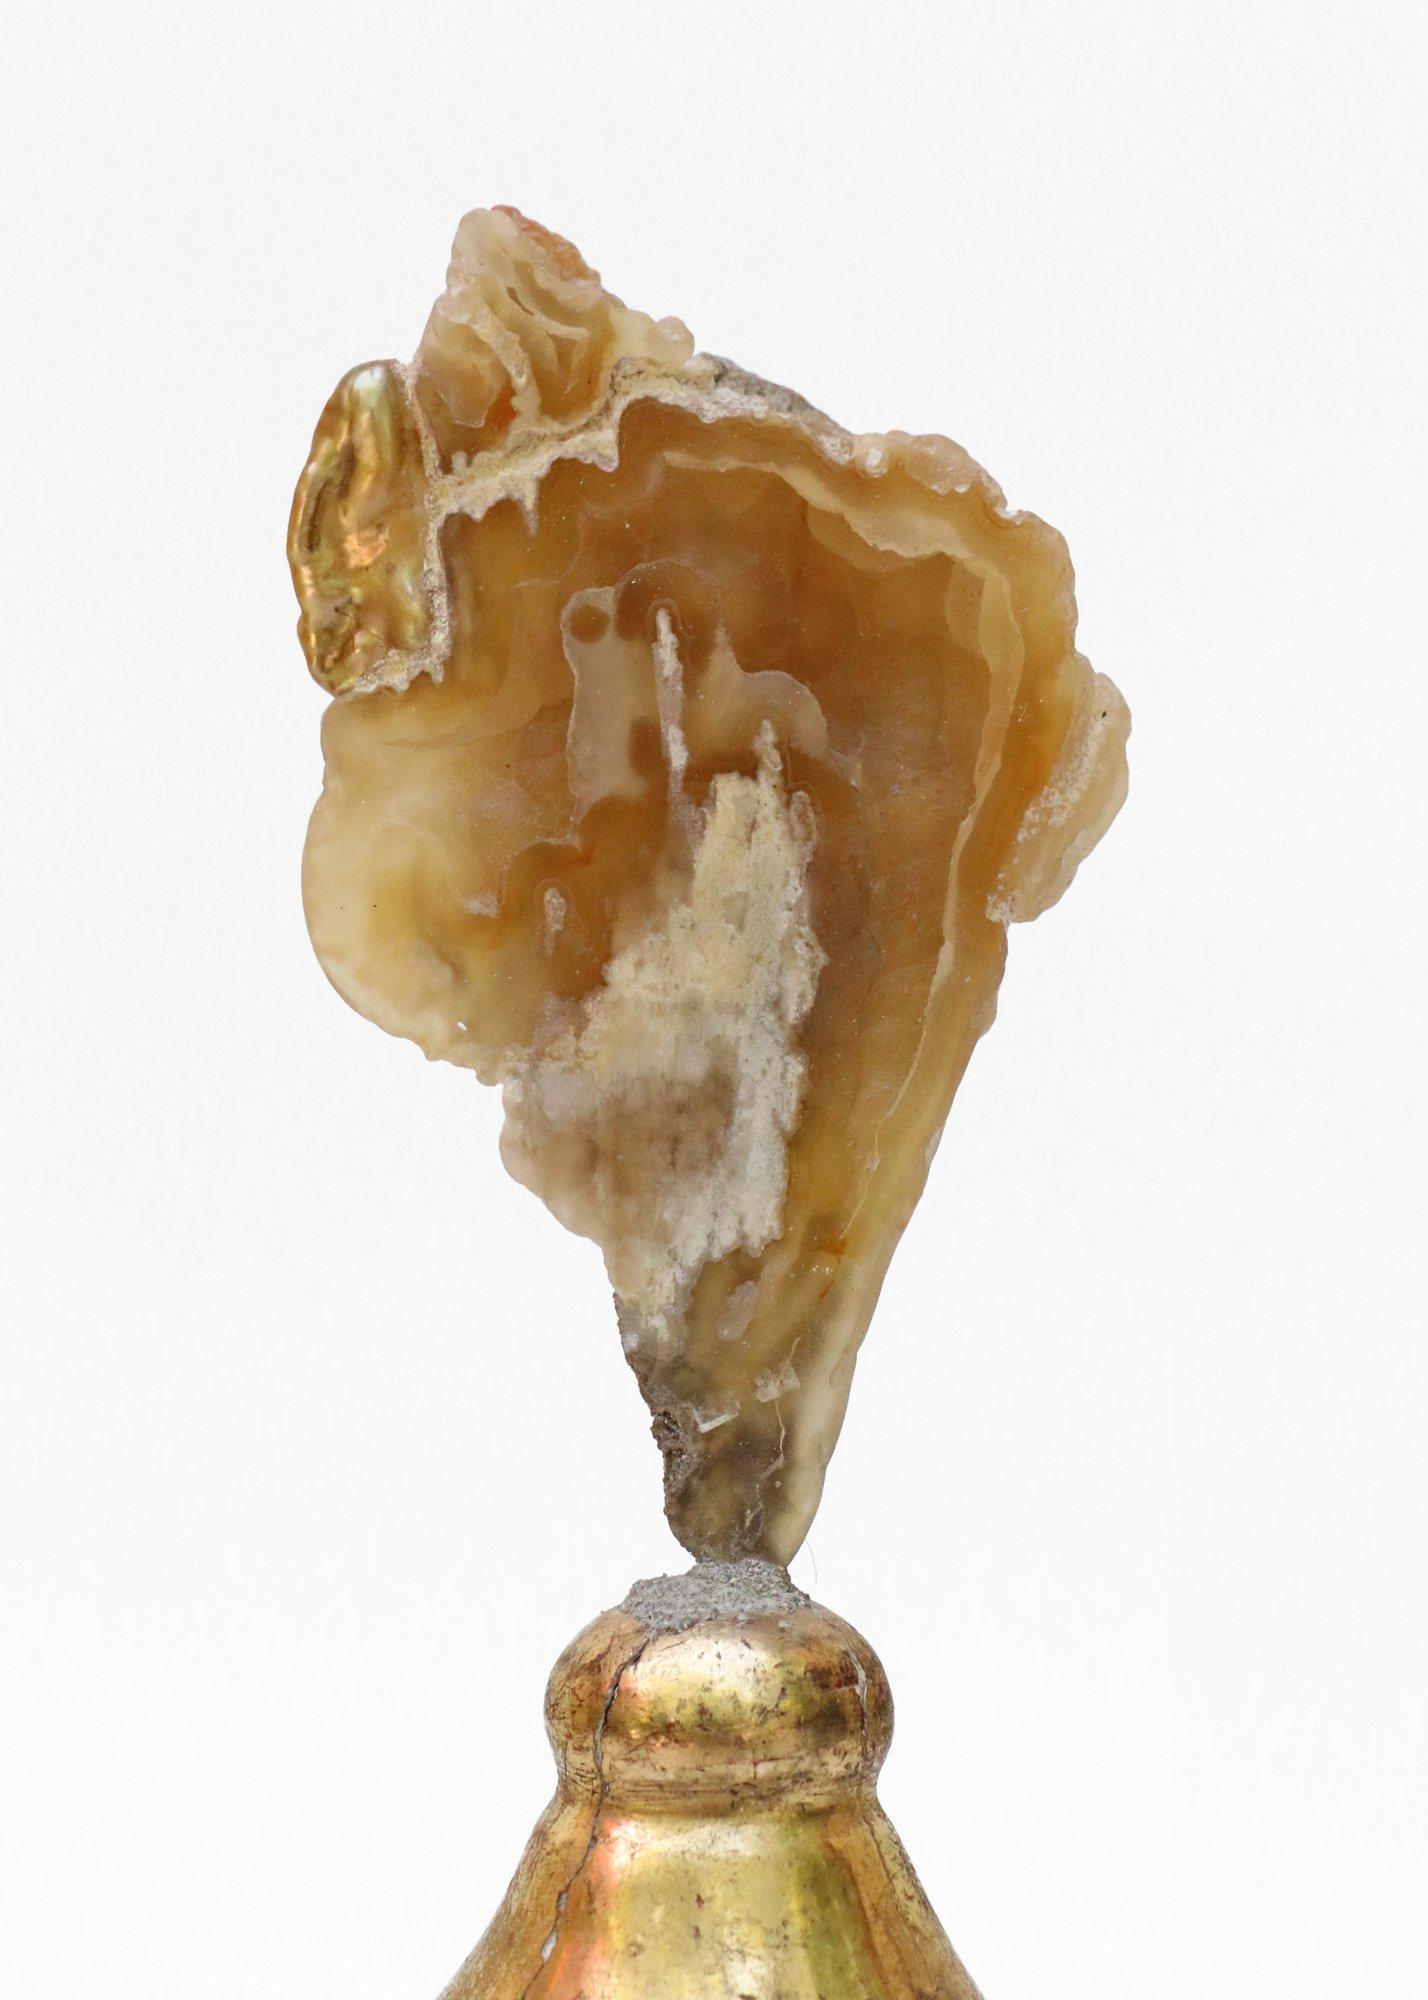 18th century Italian candlestick top with polished agate coral and a baroque pearl.

The 18th century candlestick top originally came from a candlestick from a church in Tuscany. The piece stands on the candlesticks' original metal drip pan